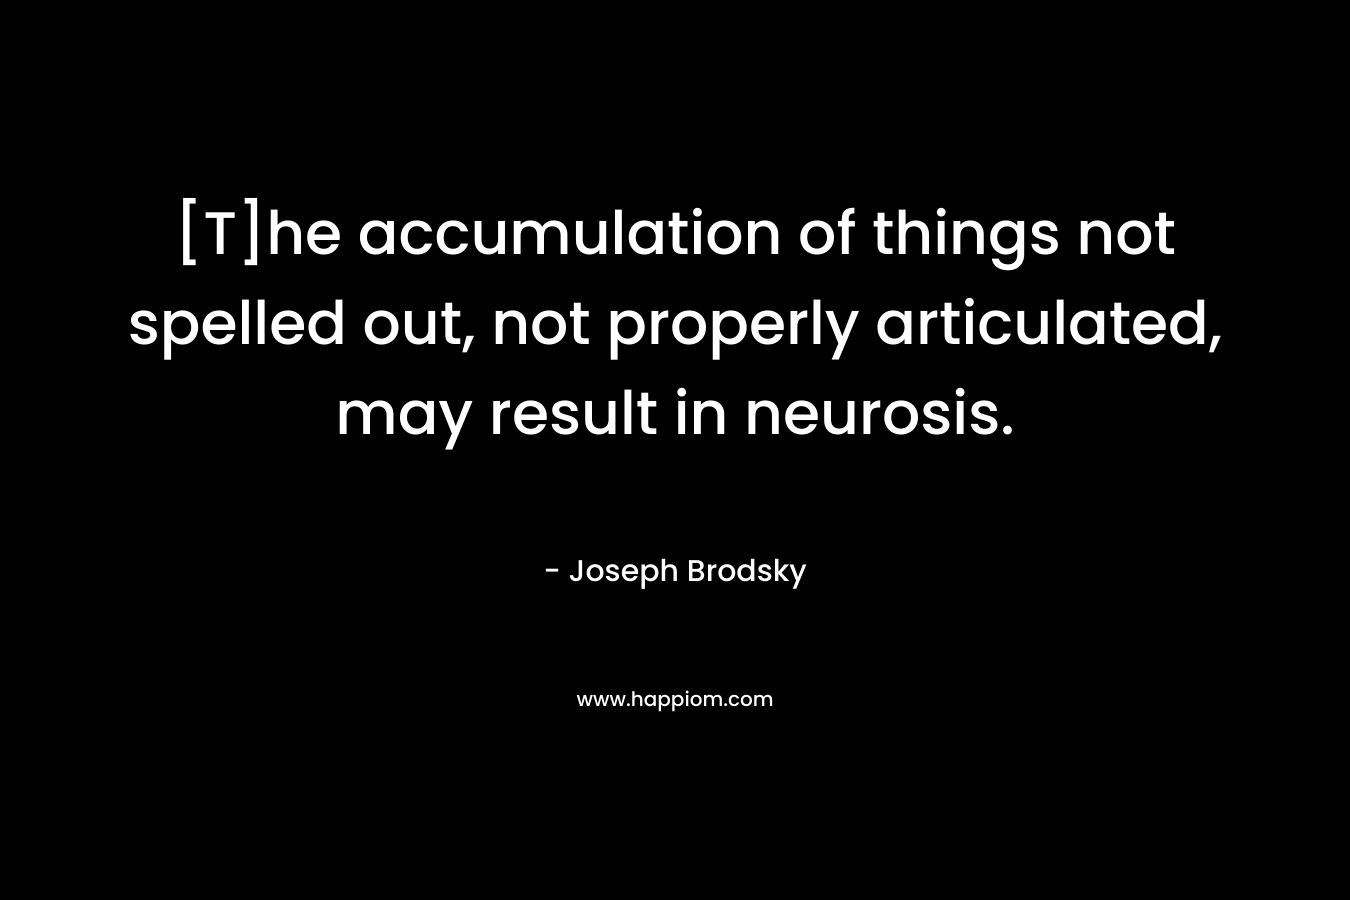 [T]he accumulation of things not spelled out, not properly articulated, may result in neurosis. – Joseph Brodsky